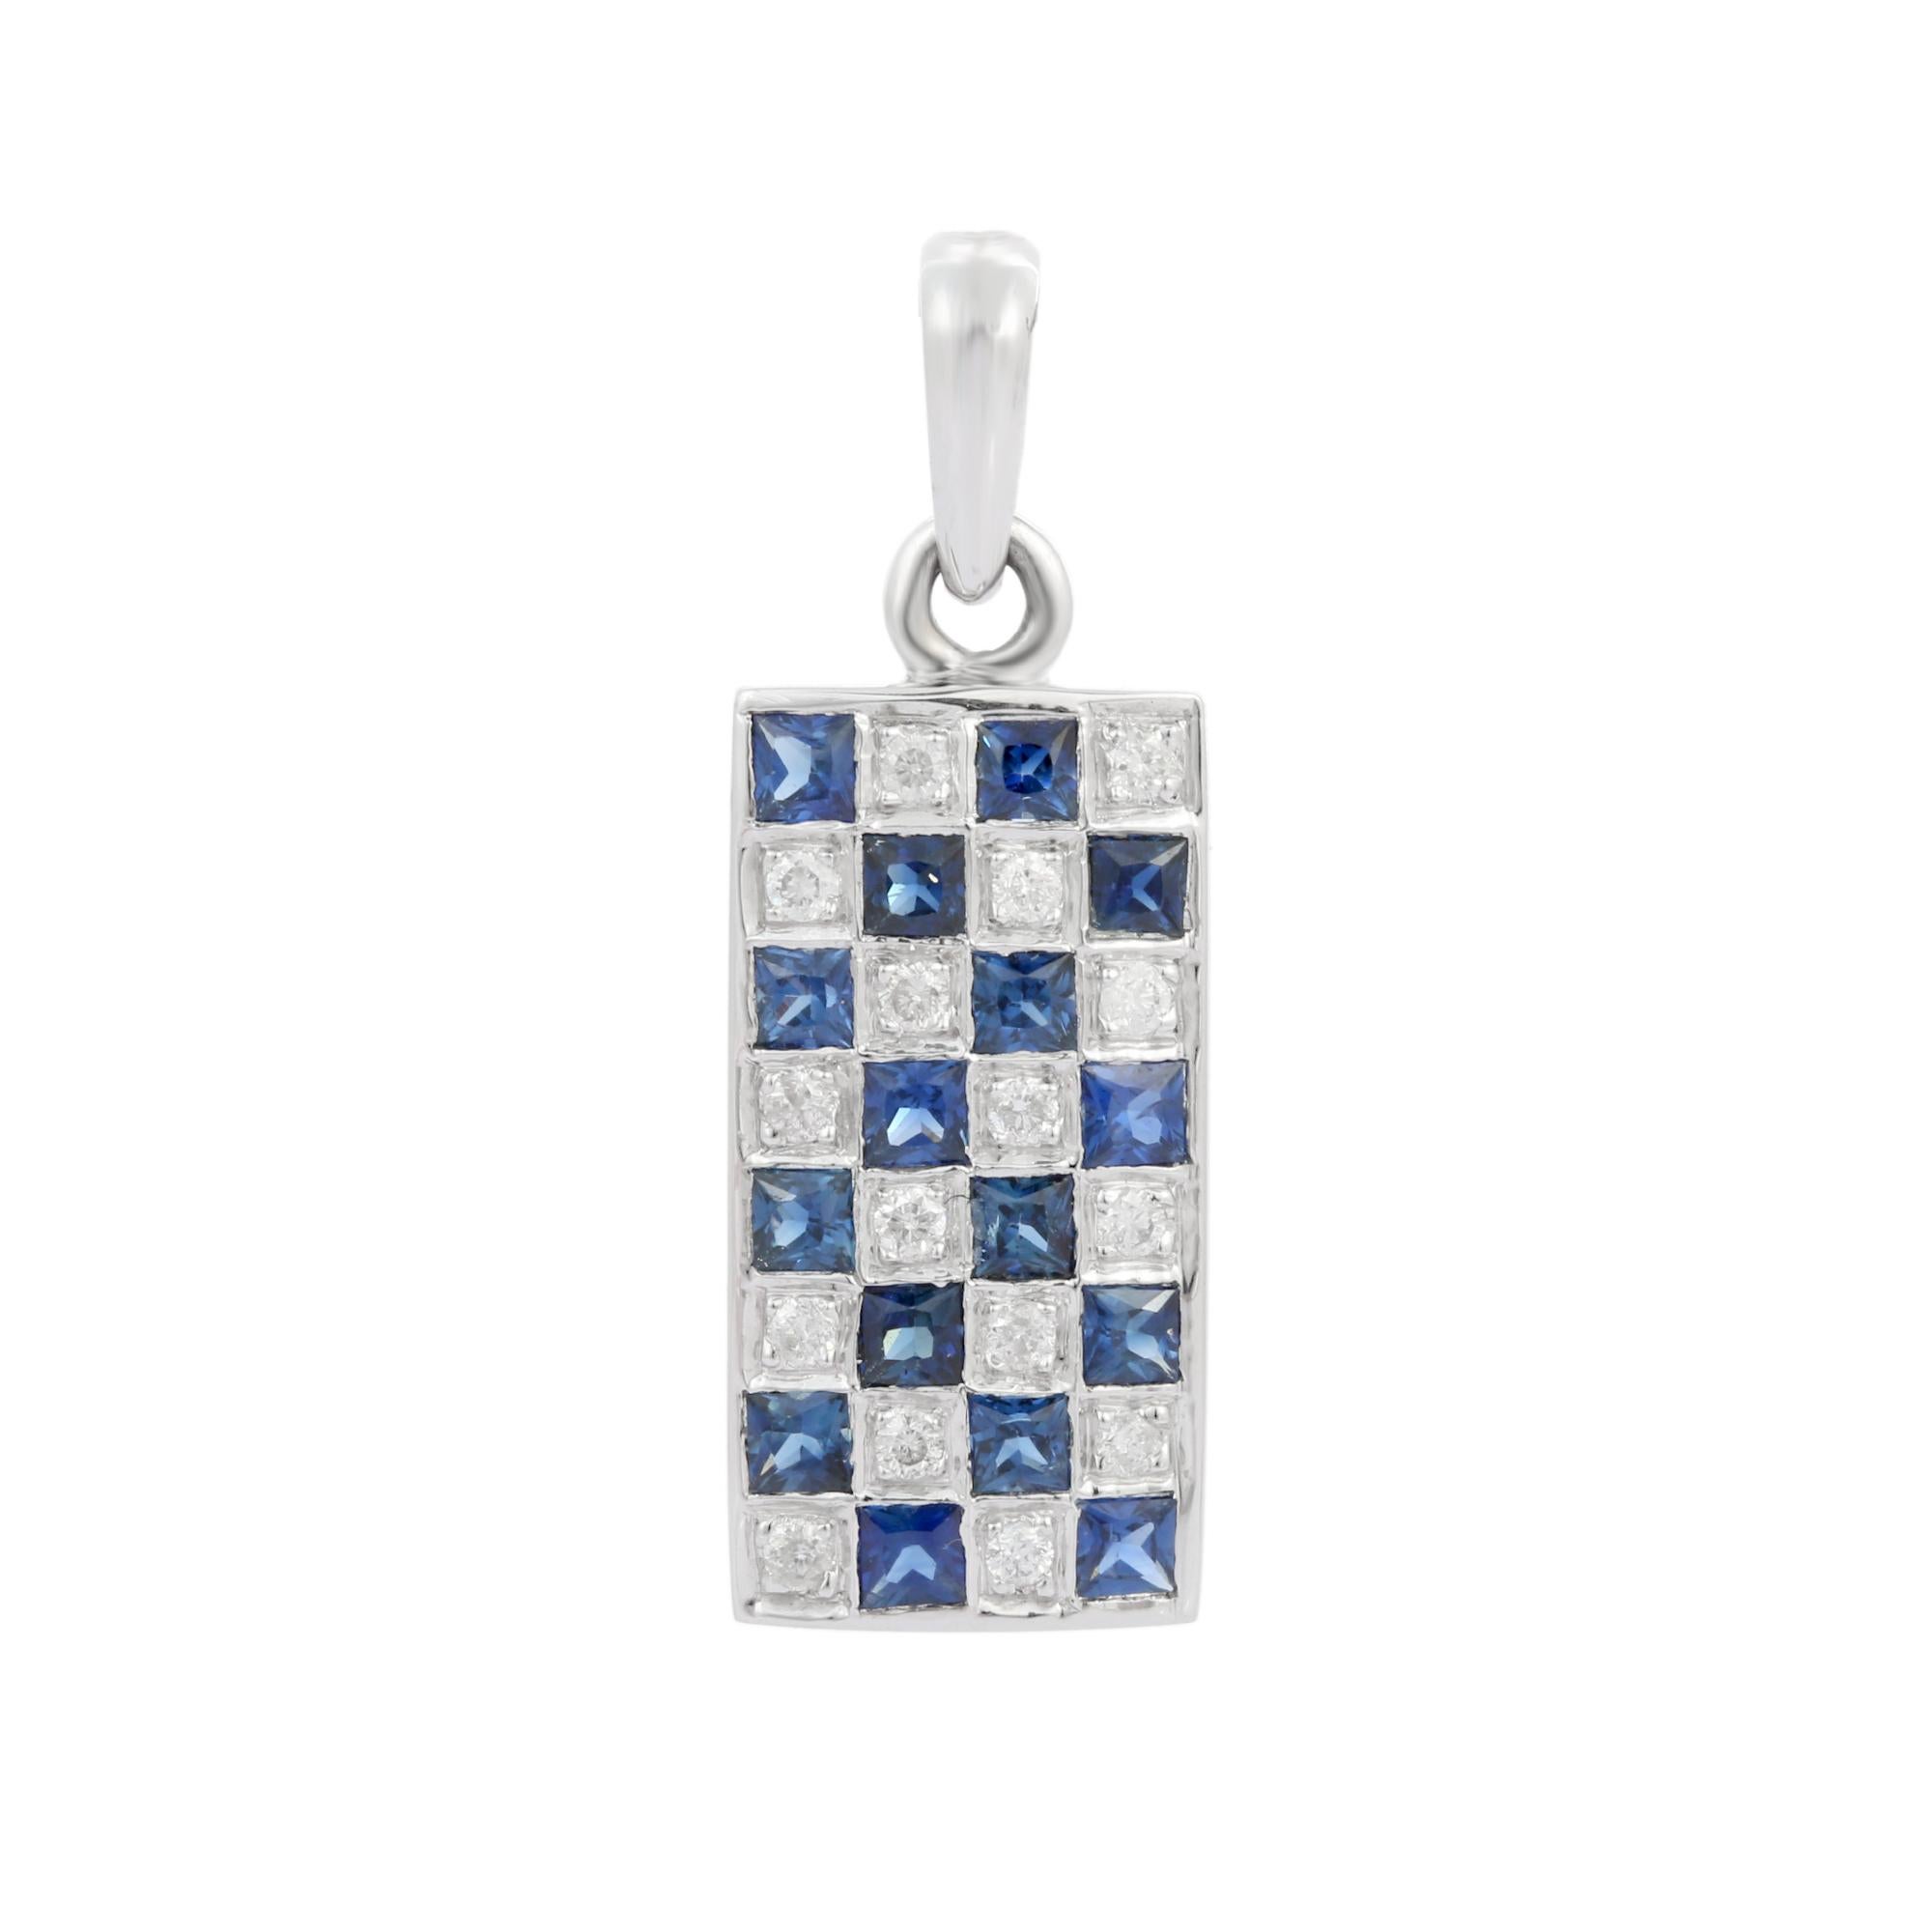 Natural Blue Sapphire Bar Shape pendant in 18K Gold. It has square cut sapphires and diamonds that completes your look with a decent touch. Pendants are used to wear or gifted to represent love and promises. It's an attractive jewelry piece that